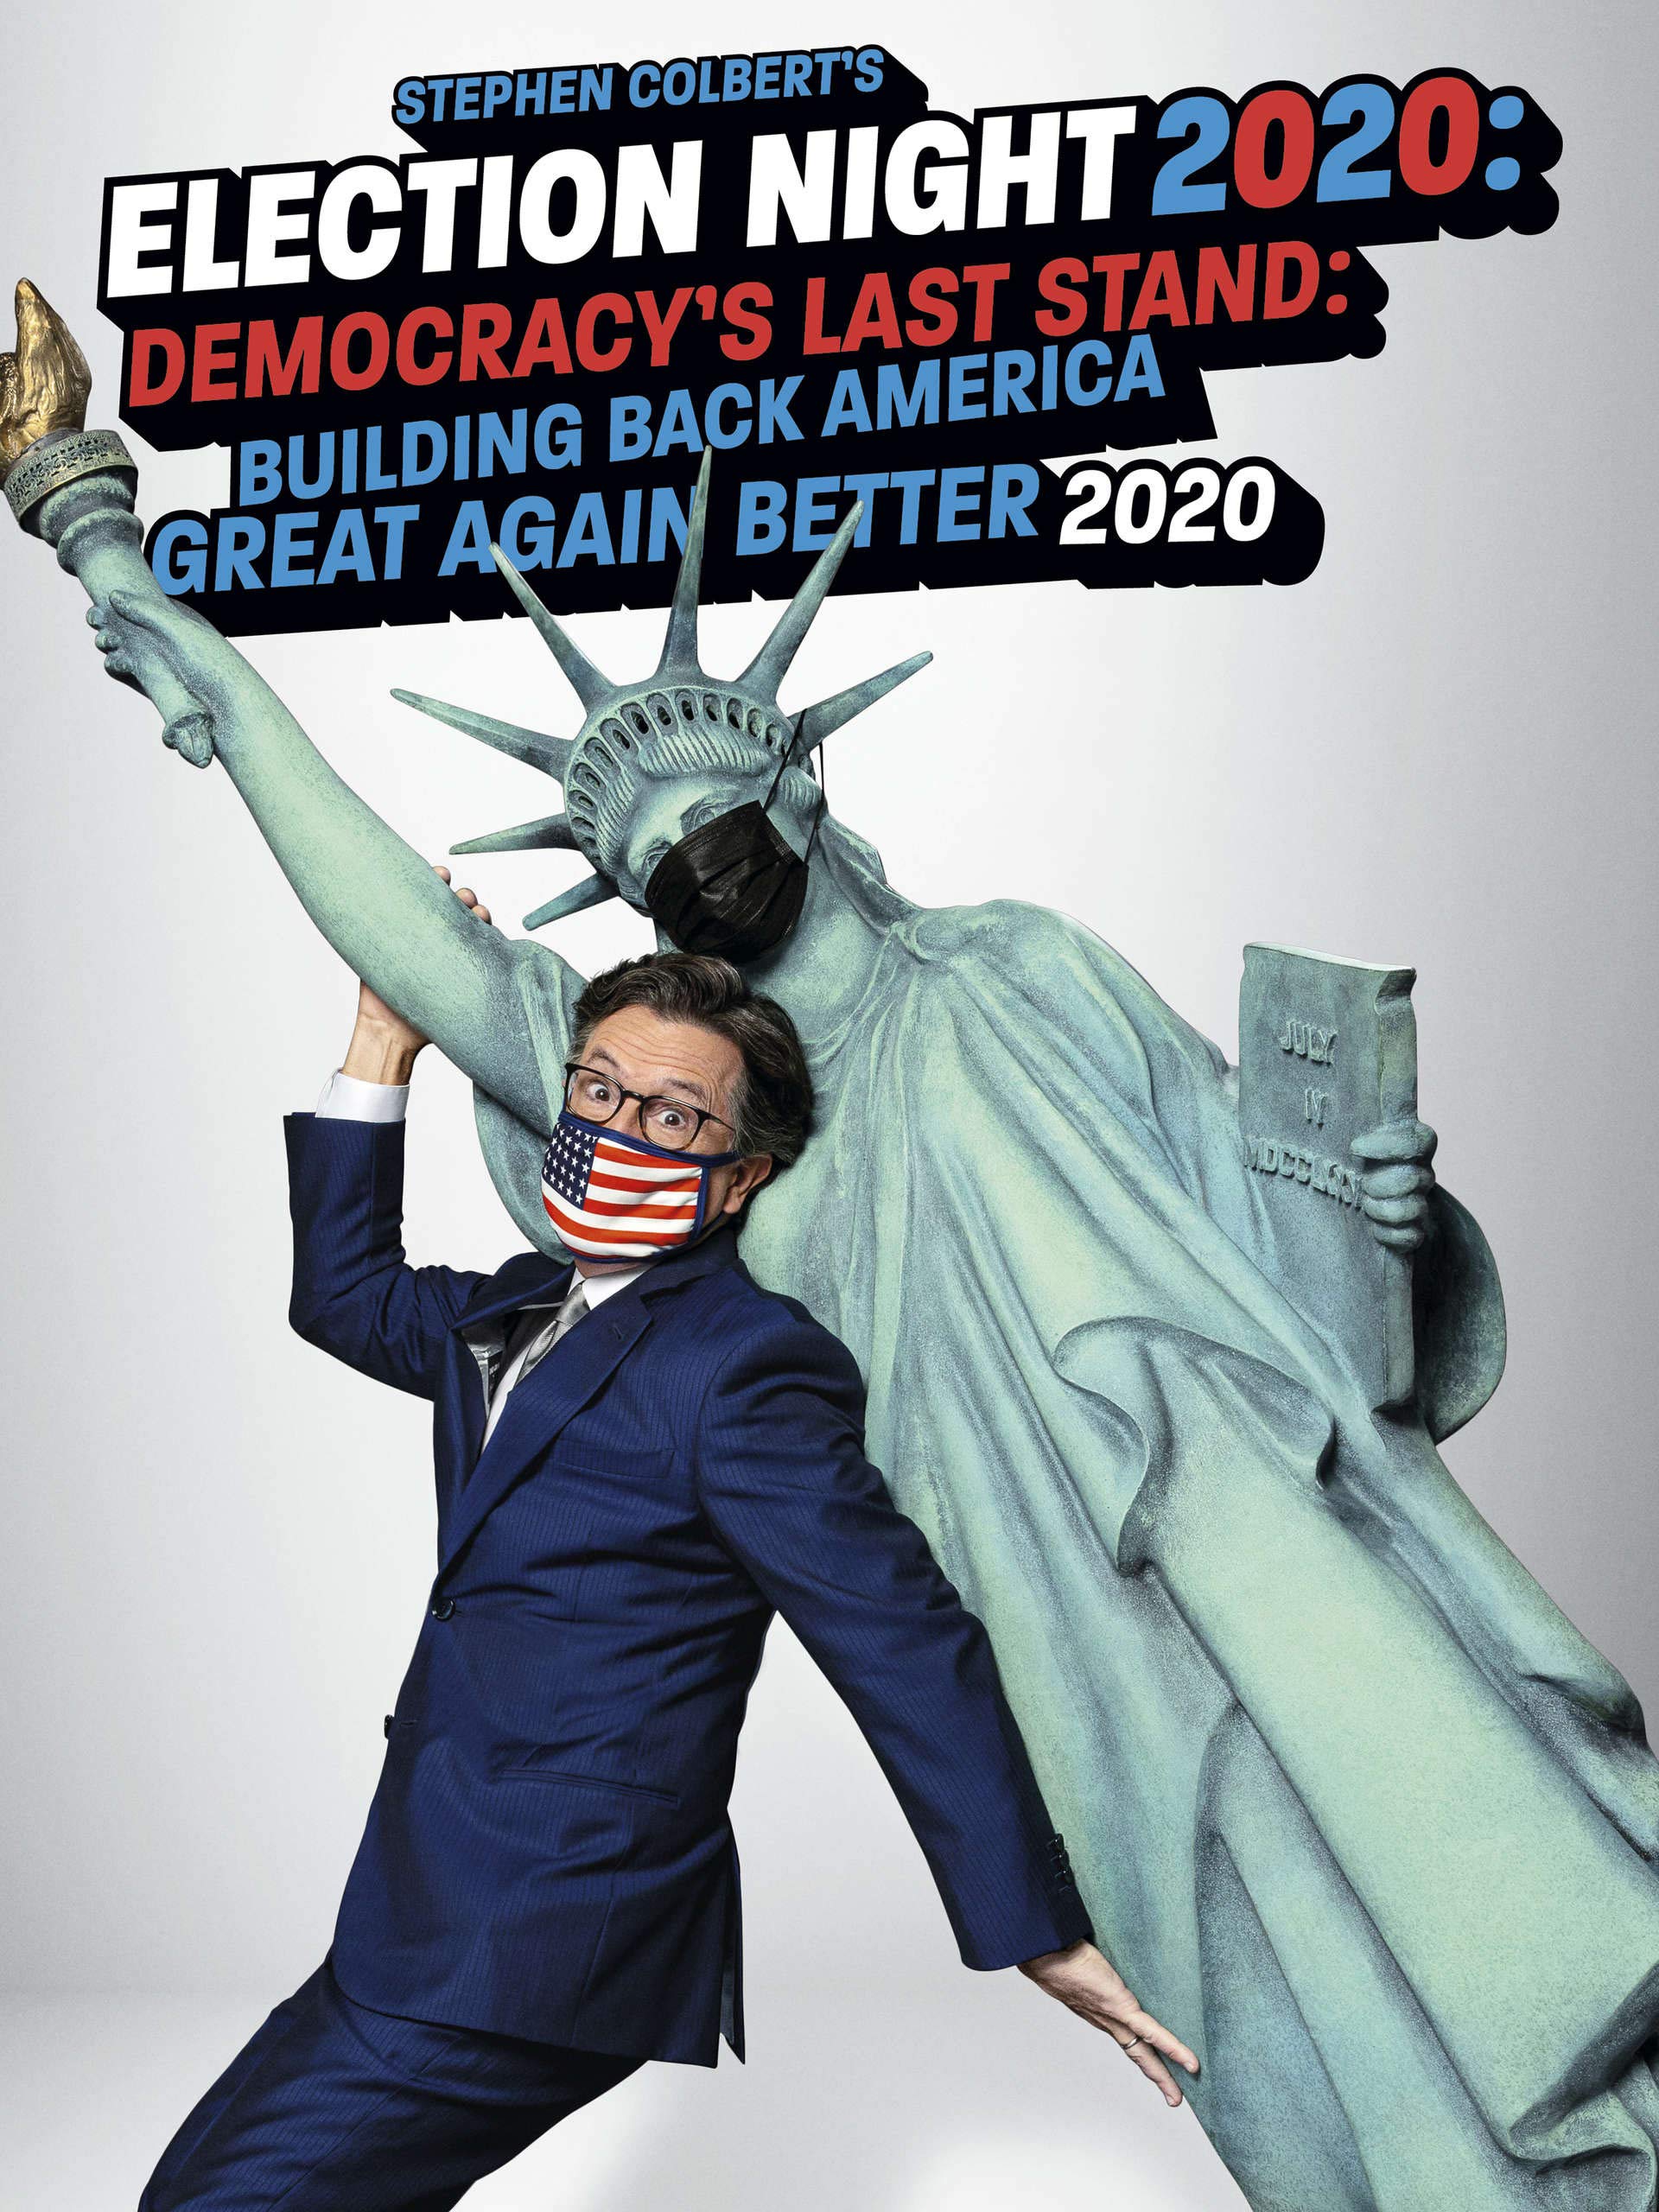 Stephen Colbert's Election Night 2020: Democracy's Last Stand: Building Back America Great Again Better 2020 (2020) постер